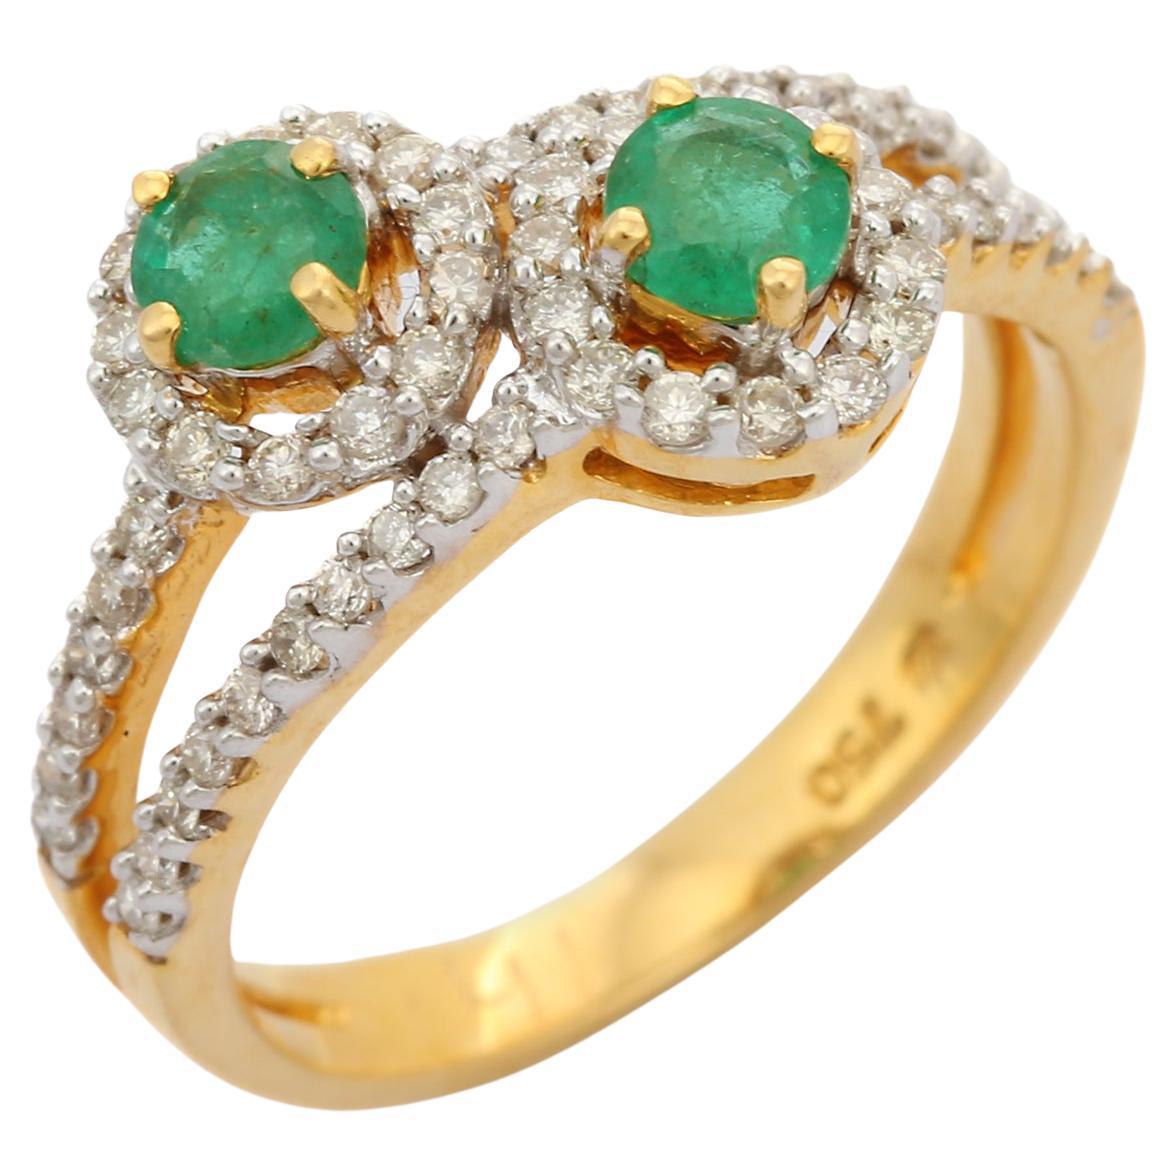 For Sale:  Modernist 18K Yellow Gold Natural Emerald Engagement Ring with Diamonds